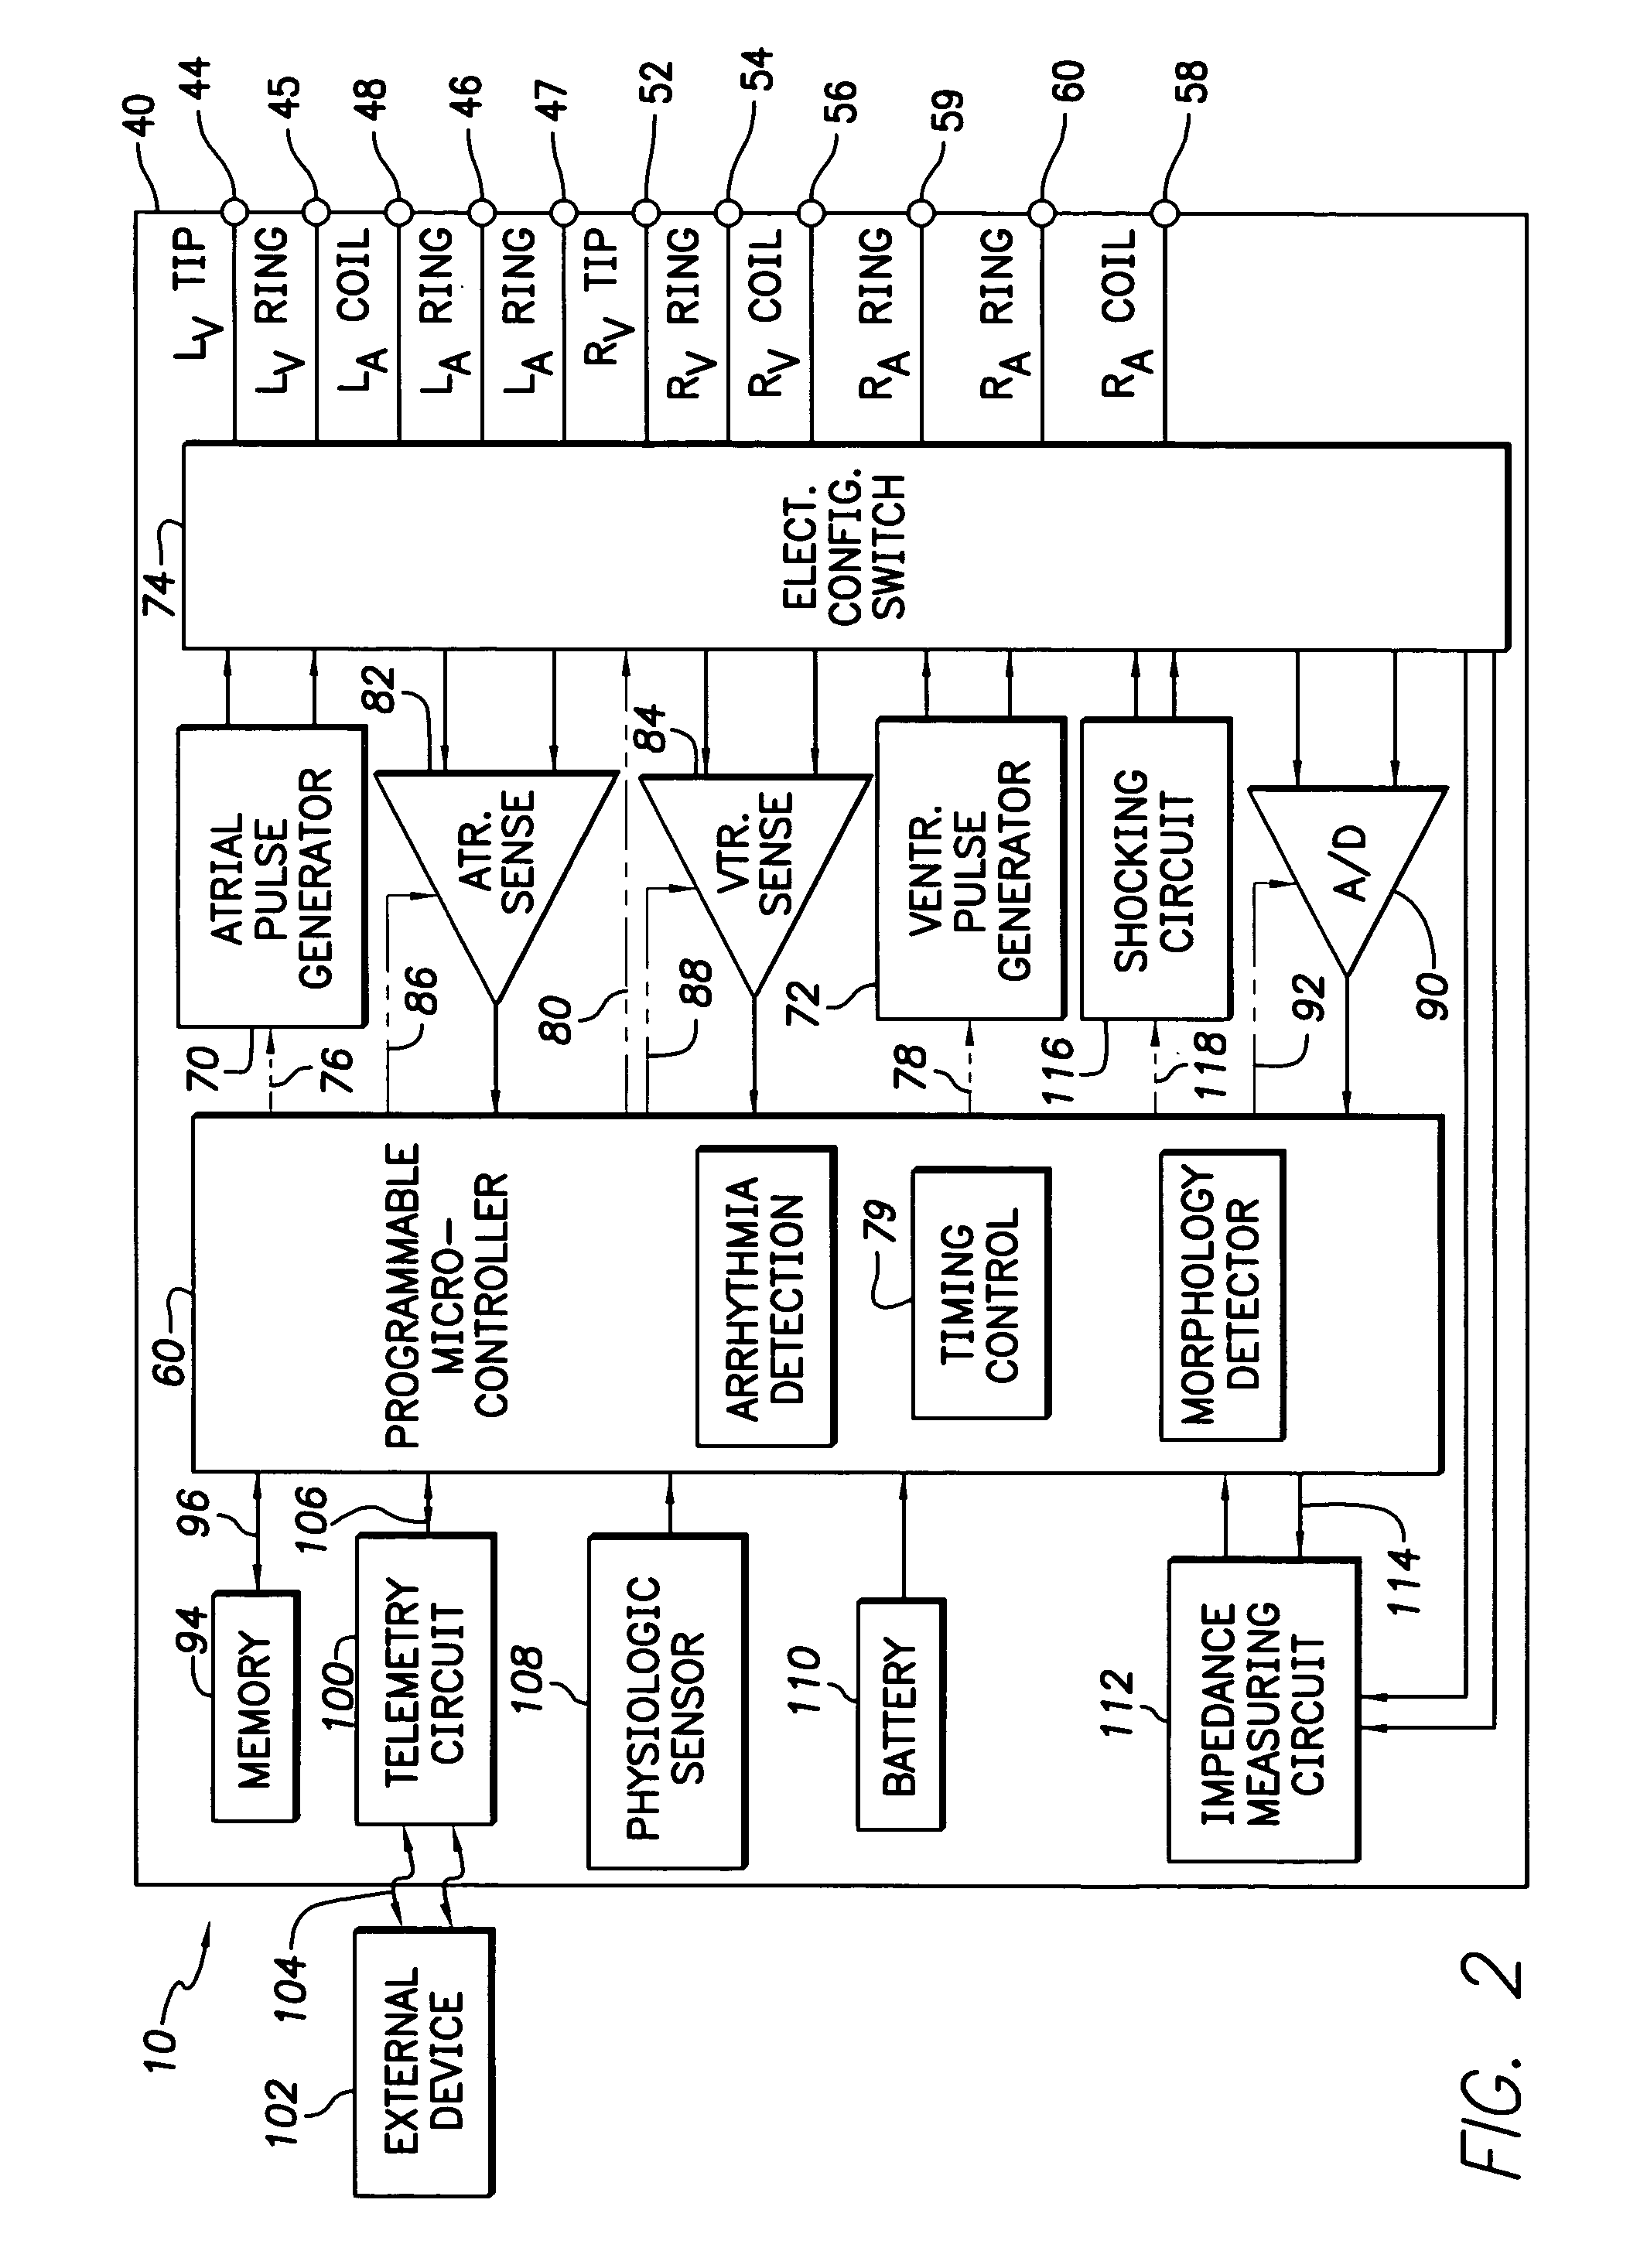 Anti-tachycardia pacing method and apparatus for multi-chamber pacing